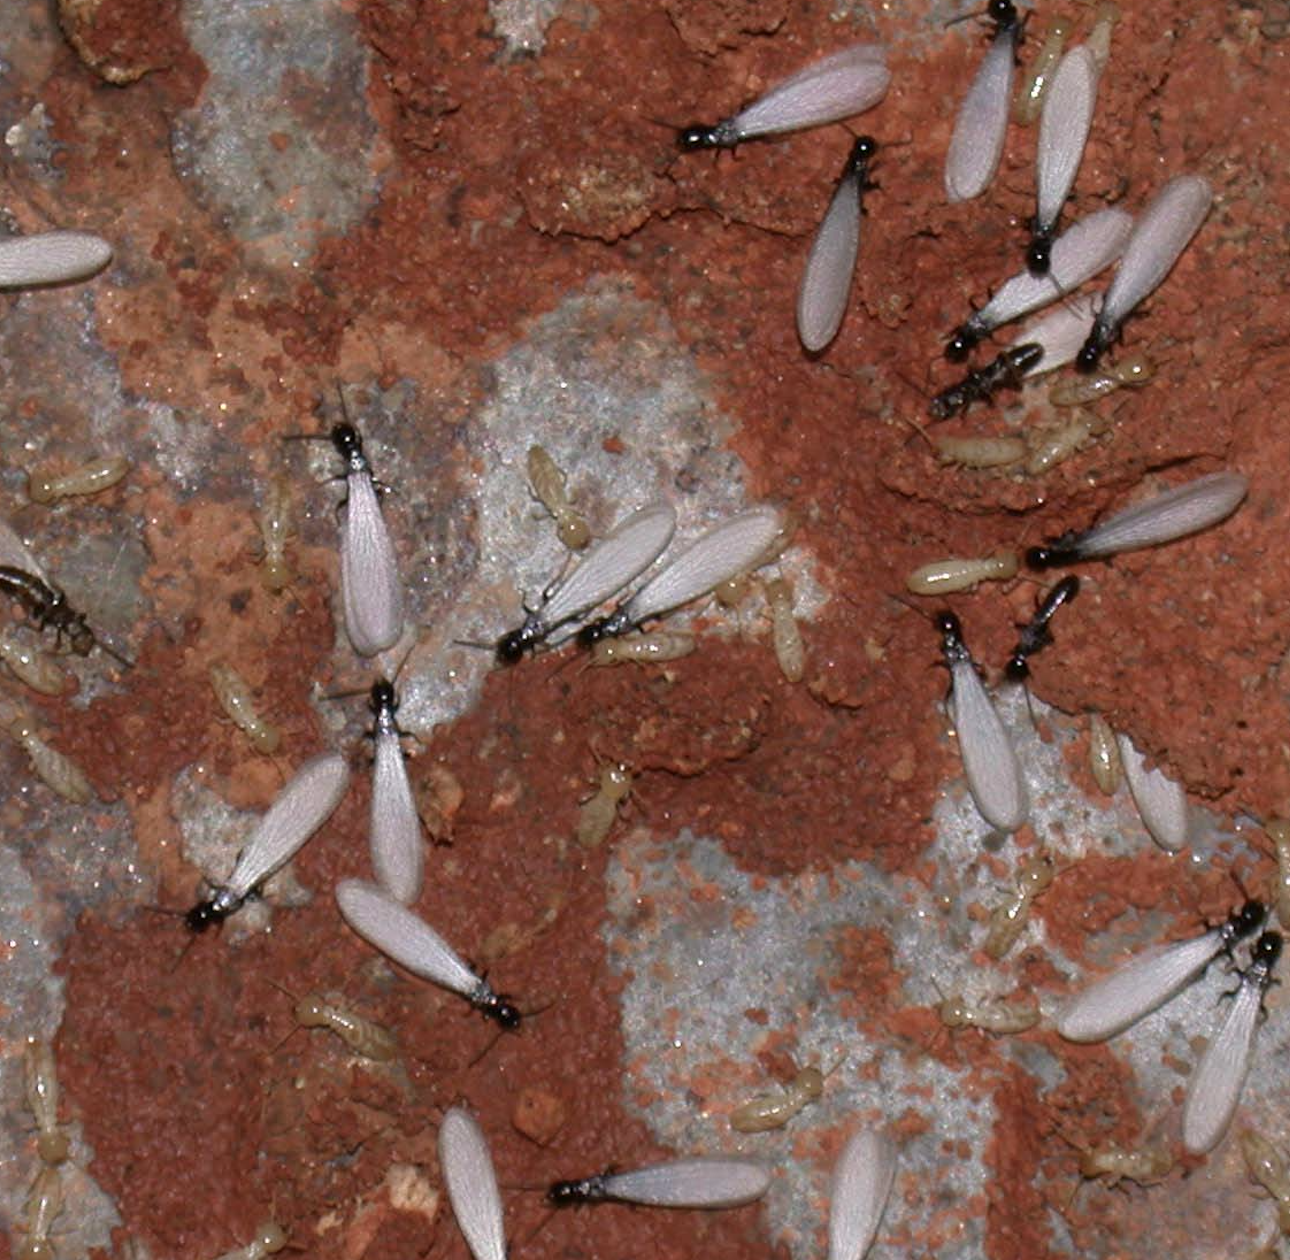 Subterranean termite swarmers are most commonly seen in spring and are a telltale sign of termite infestation. (Photo by Brian Forschler)